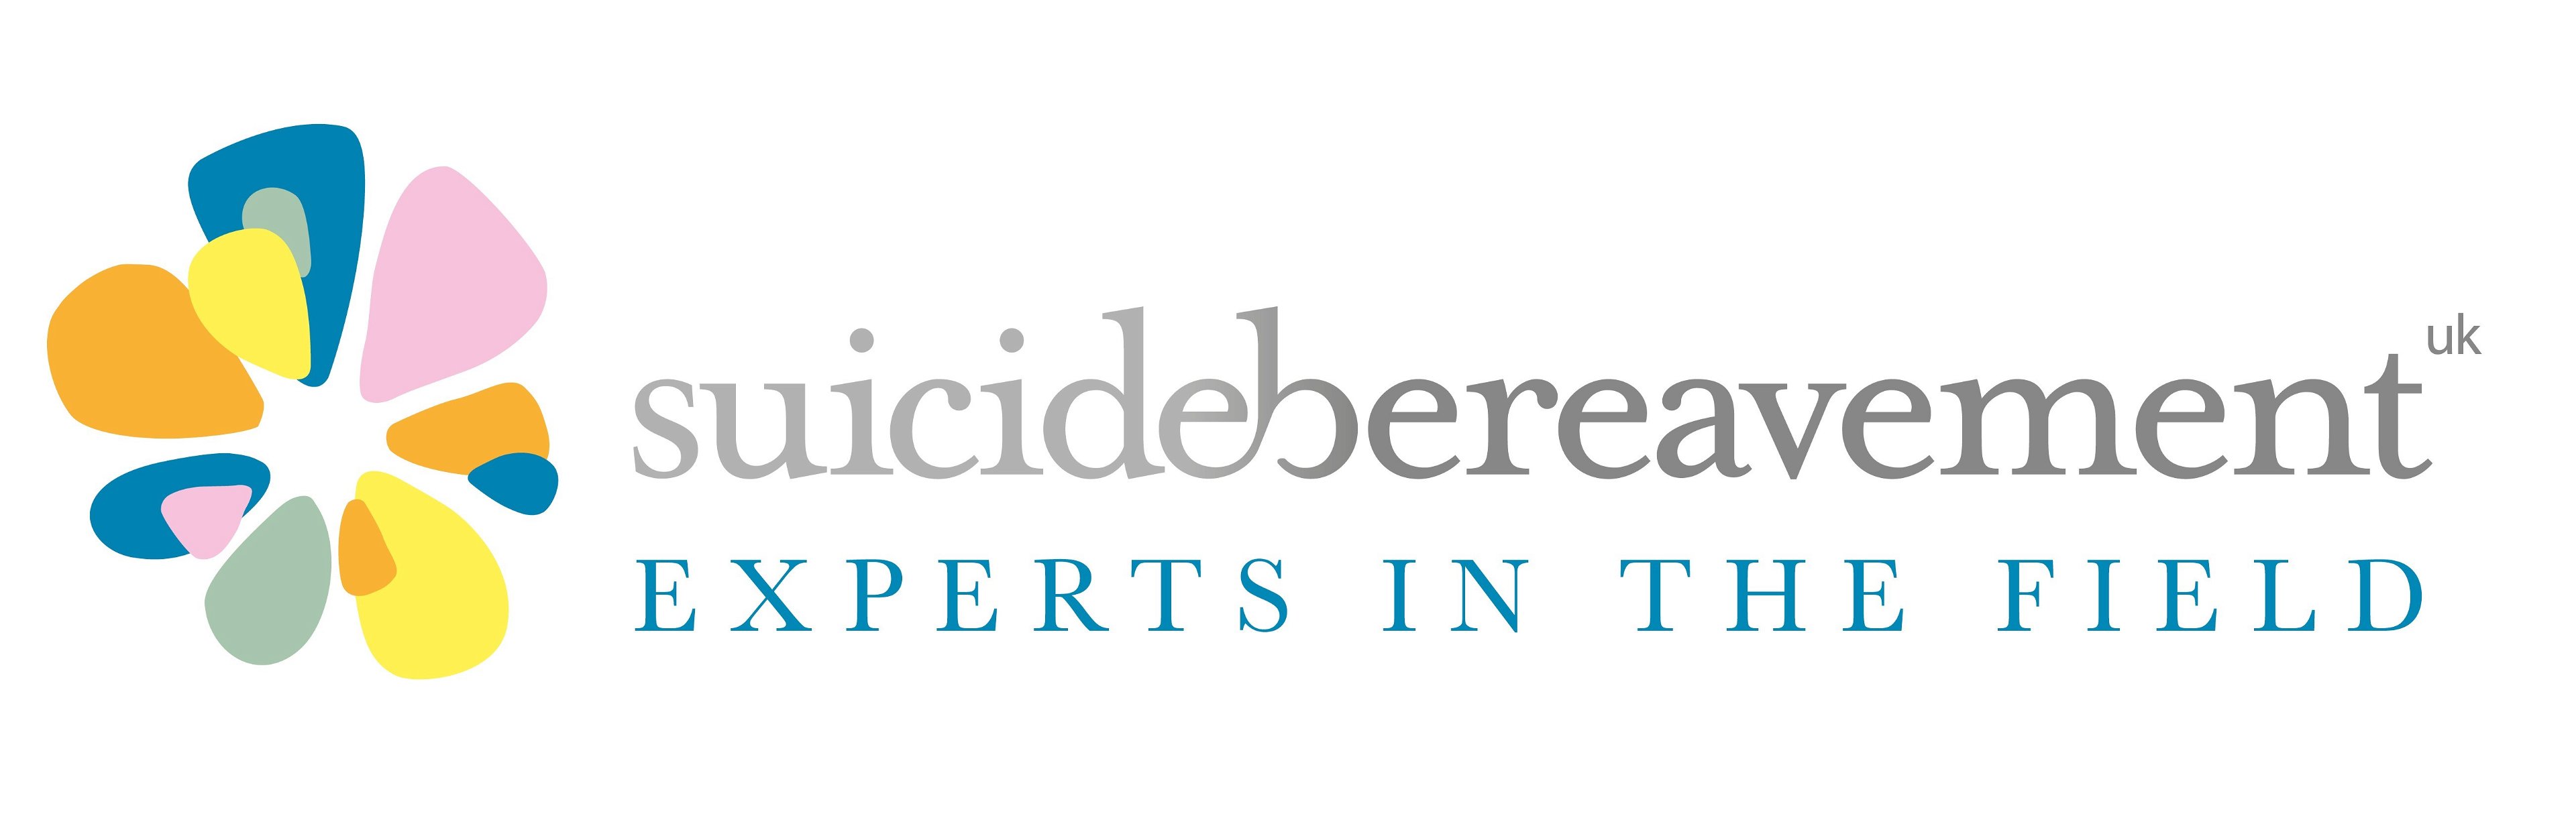 Suicide Bereavement UK’s 13th International Hybrid Conference